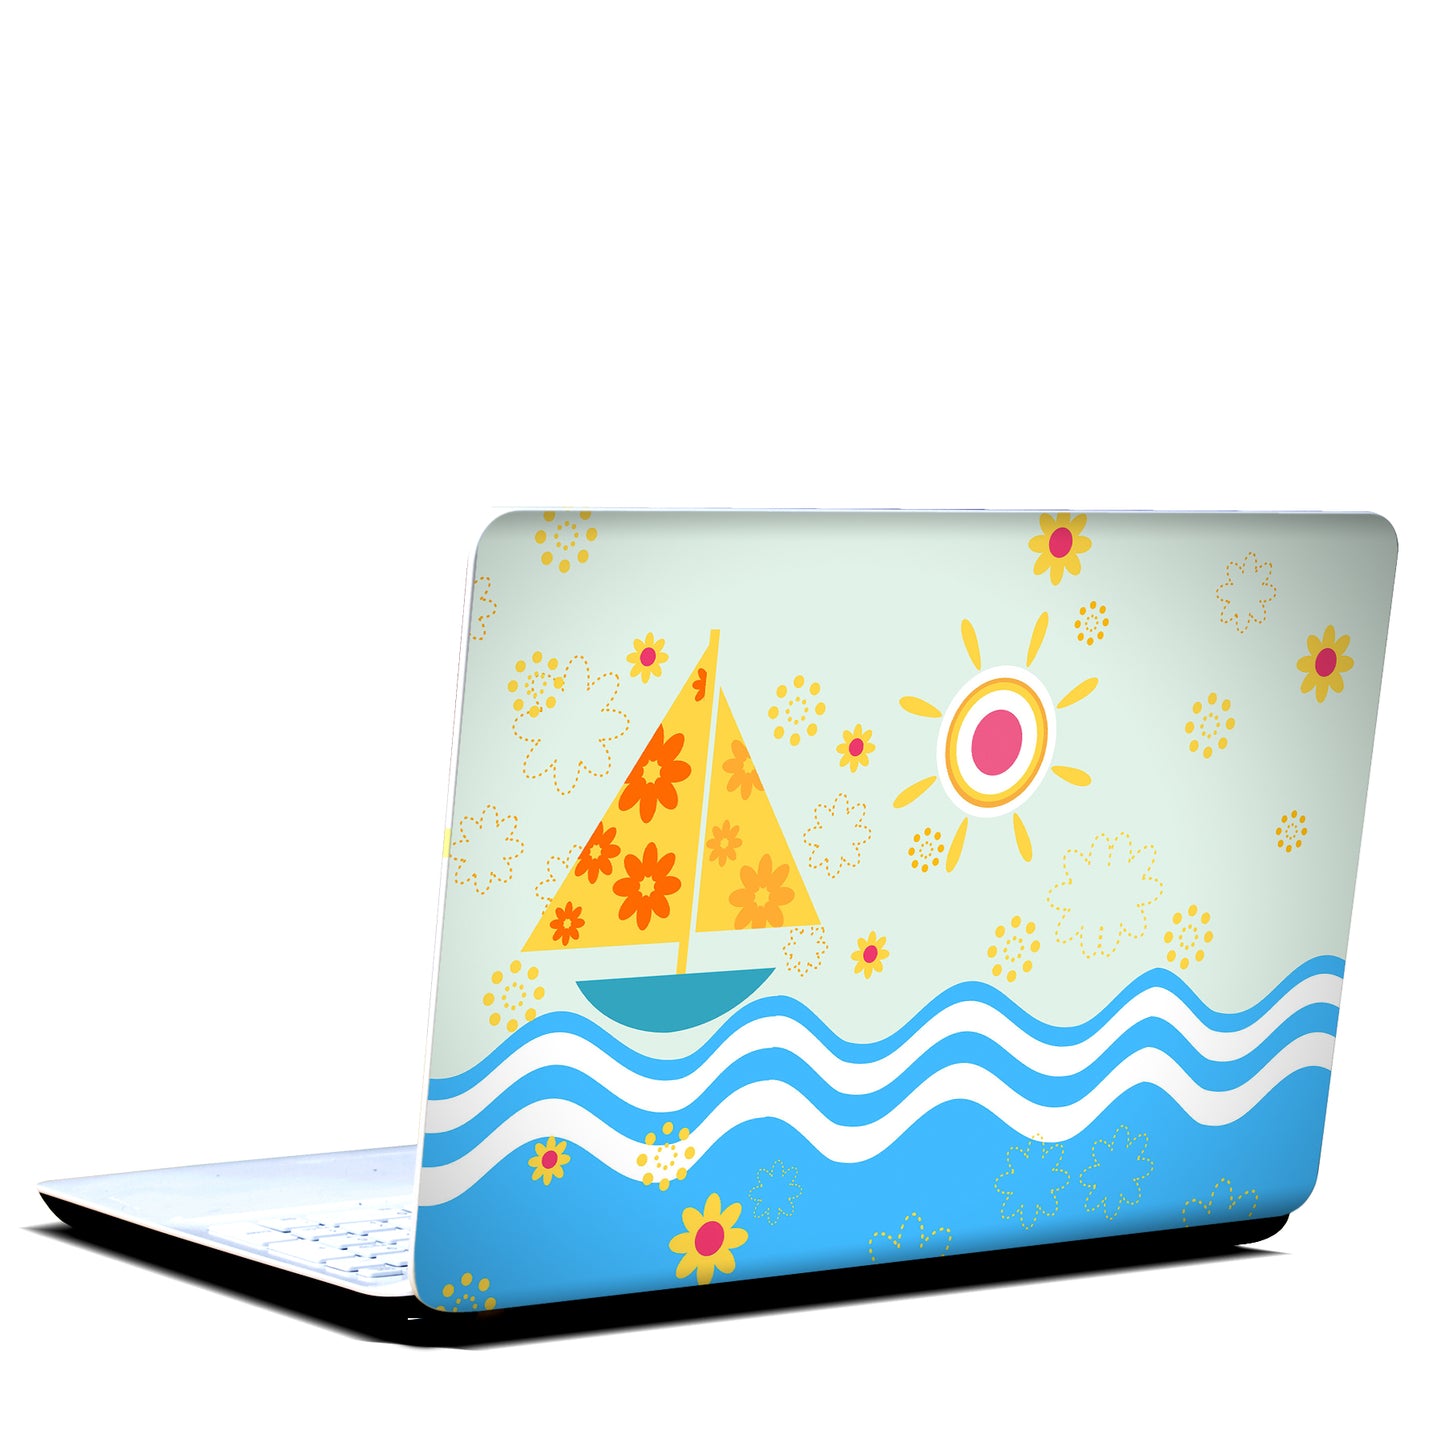 iberry's Vinyl Laptop Skin Sticker Collection for Dell, Hp, Toshiba, Acer, Asus & All Models (Upto 15.6 inches) -17